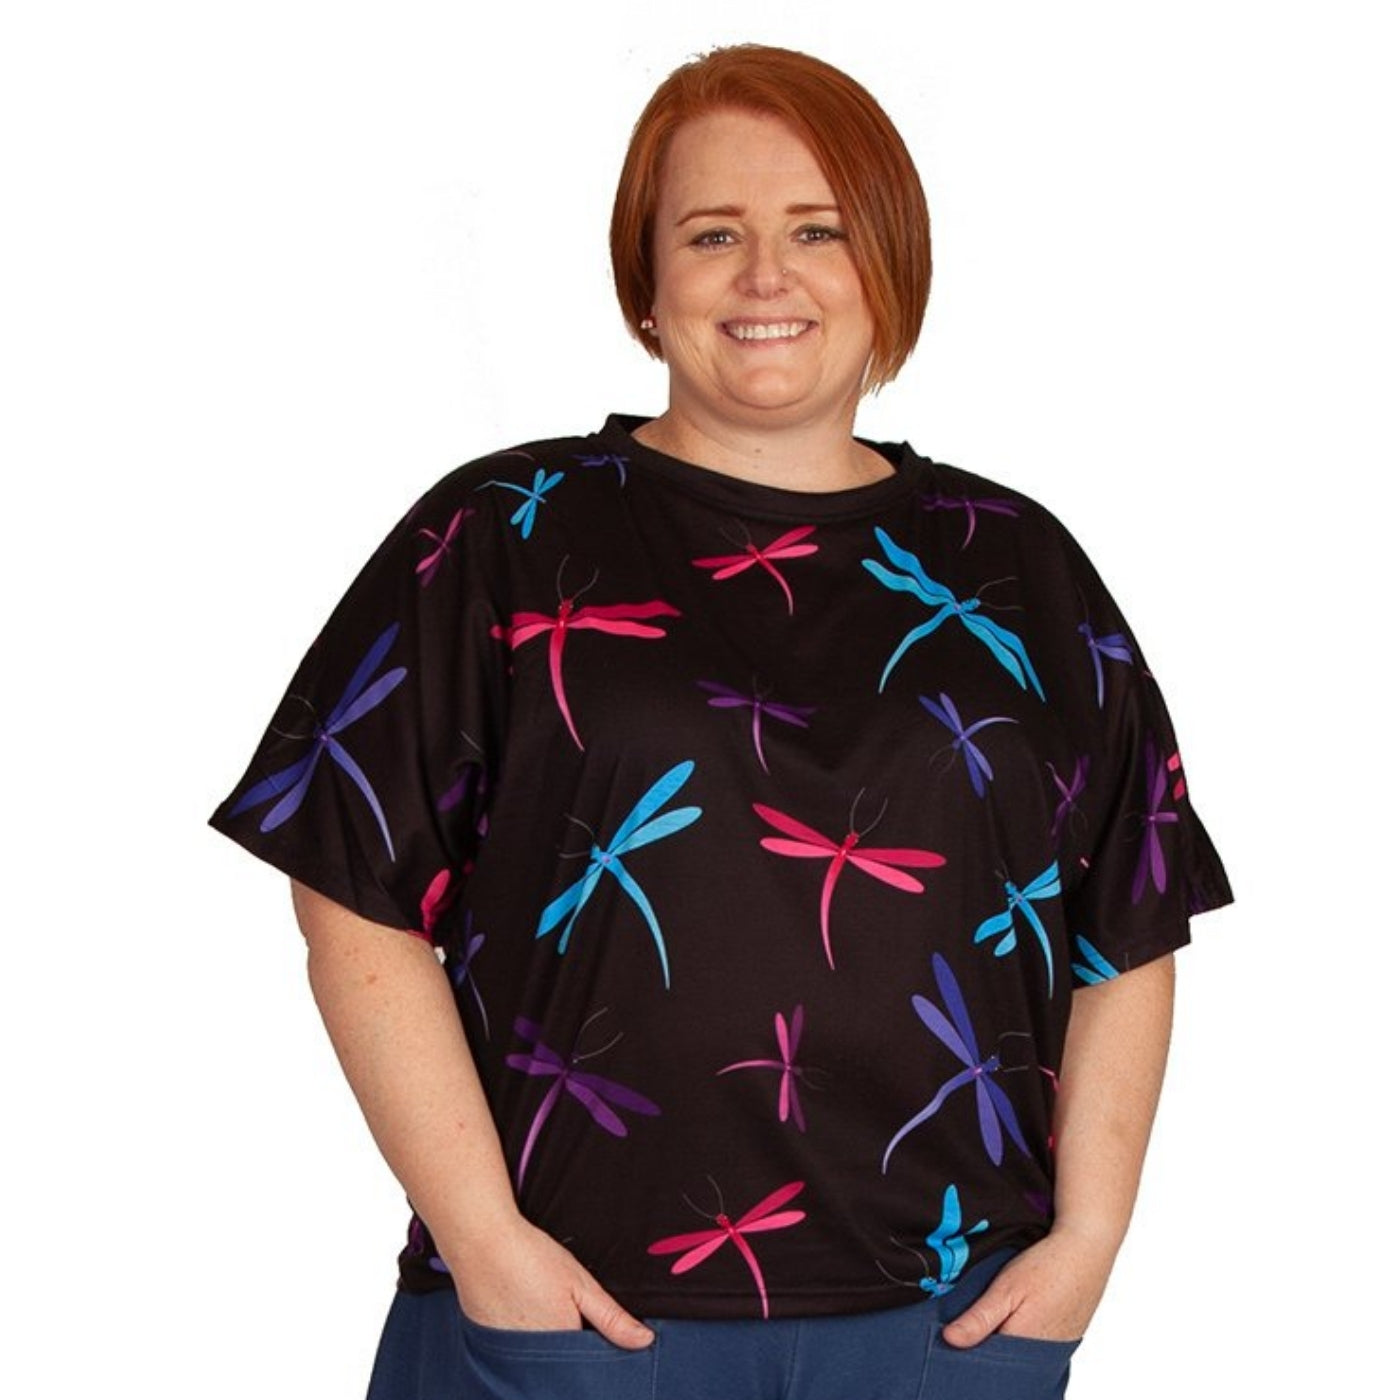 Midnight Dreaming Batwing Top by RainbowsAndFairies.com (Dragonfly - Purple & Blue - Butterfly - Kitsch - Shirt - Vintage Inspired - Rock & Roll) - SKU: CL_BATOP_DREAM_MID - Pic 03